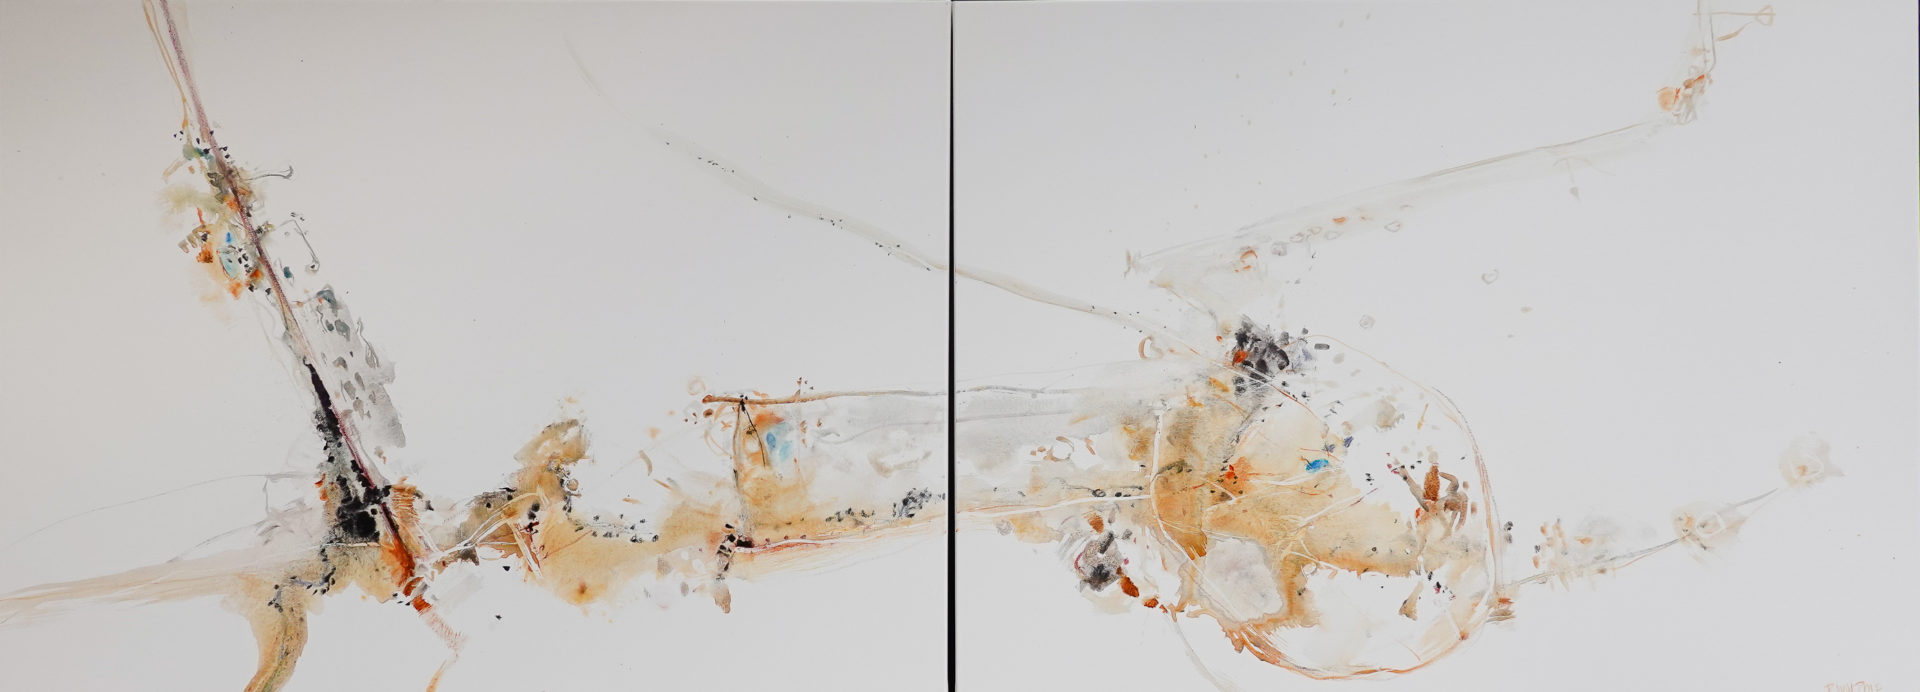 In drought I & II | Pam Walpole | Mixed media on canvas diptych. | 91 x 244 cm | $6500